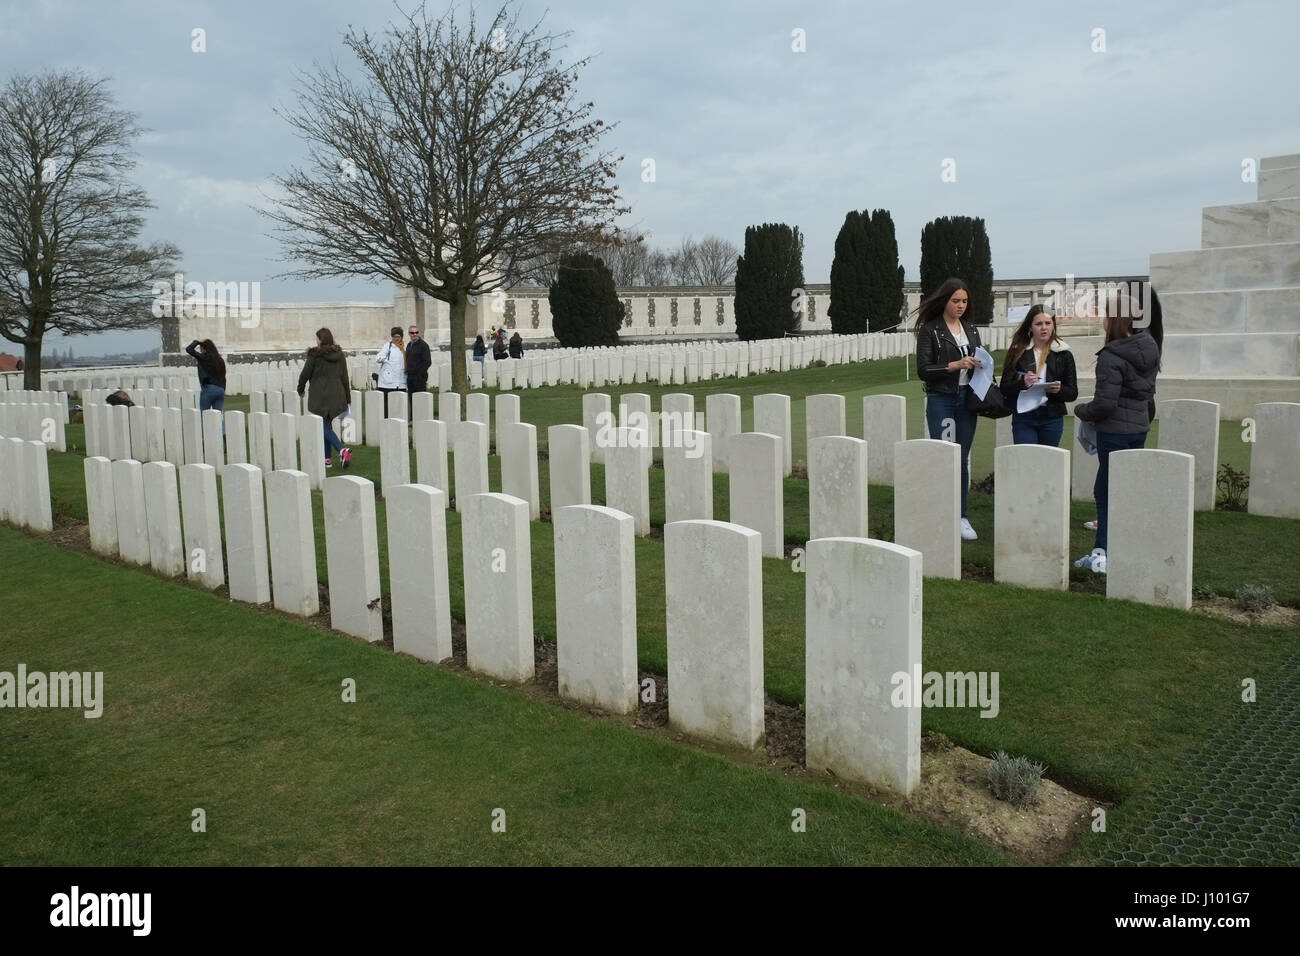 School group standing before a grave at the Tyne Cot Memorial in Passendale Stock Photo